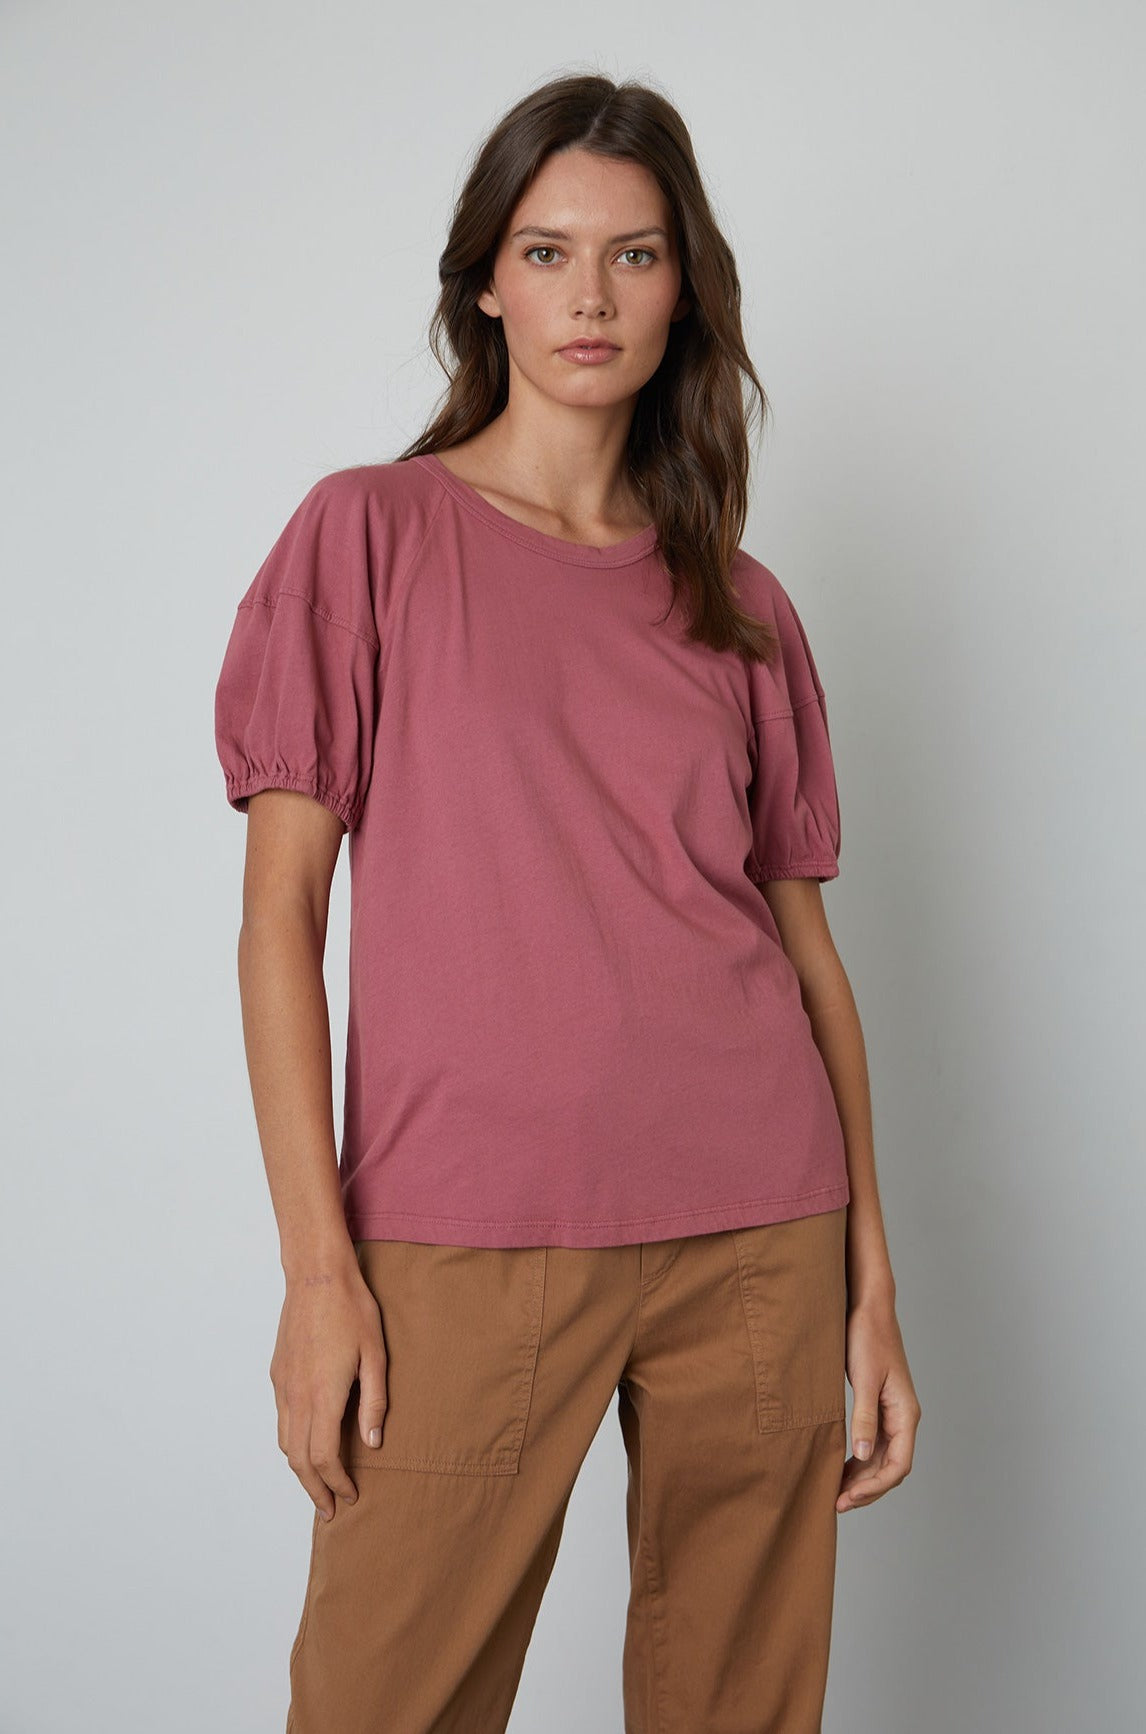 Vernice Puff Sleeve Top in Beauty with Misty pants in sepia front view-25011938590913